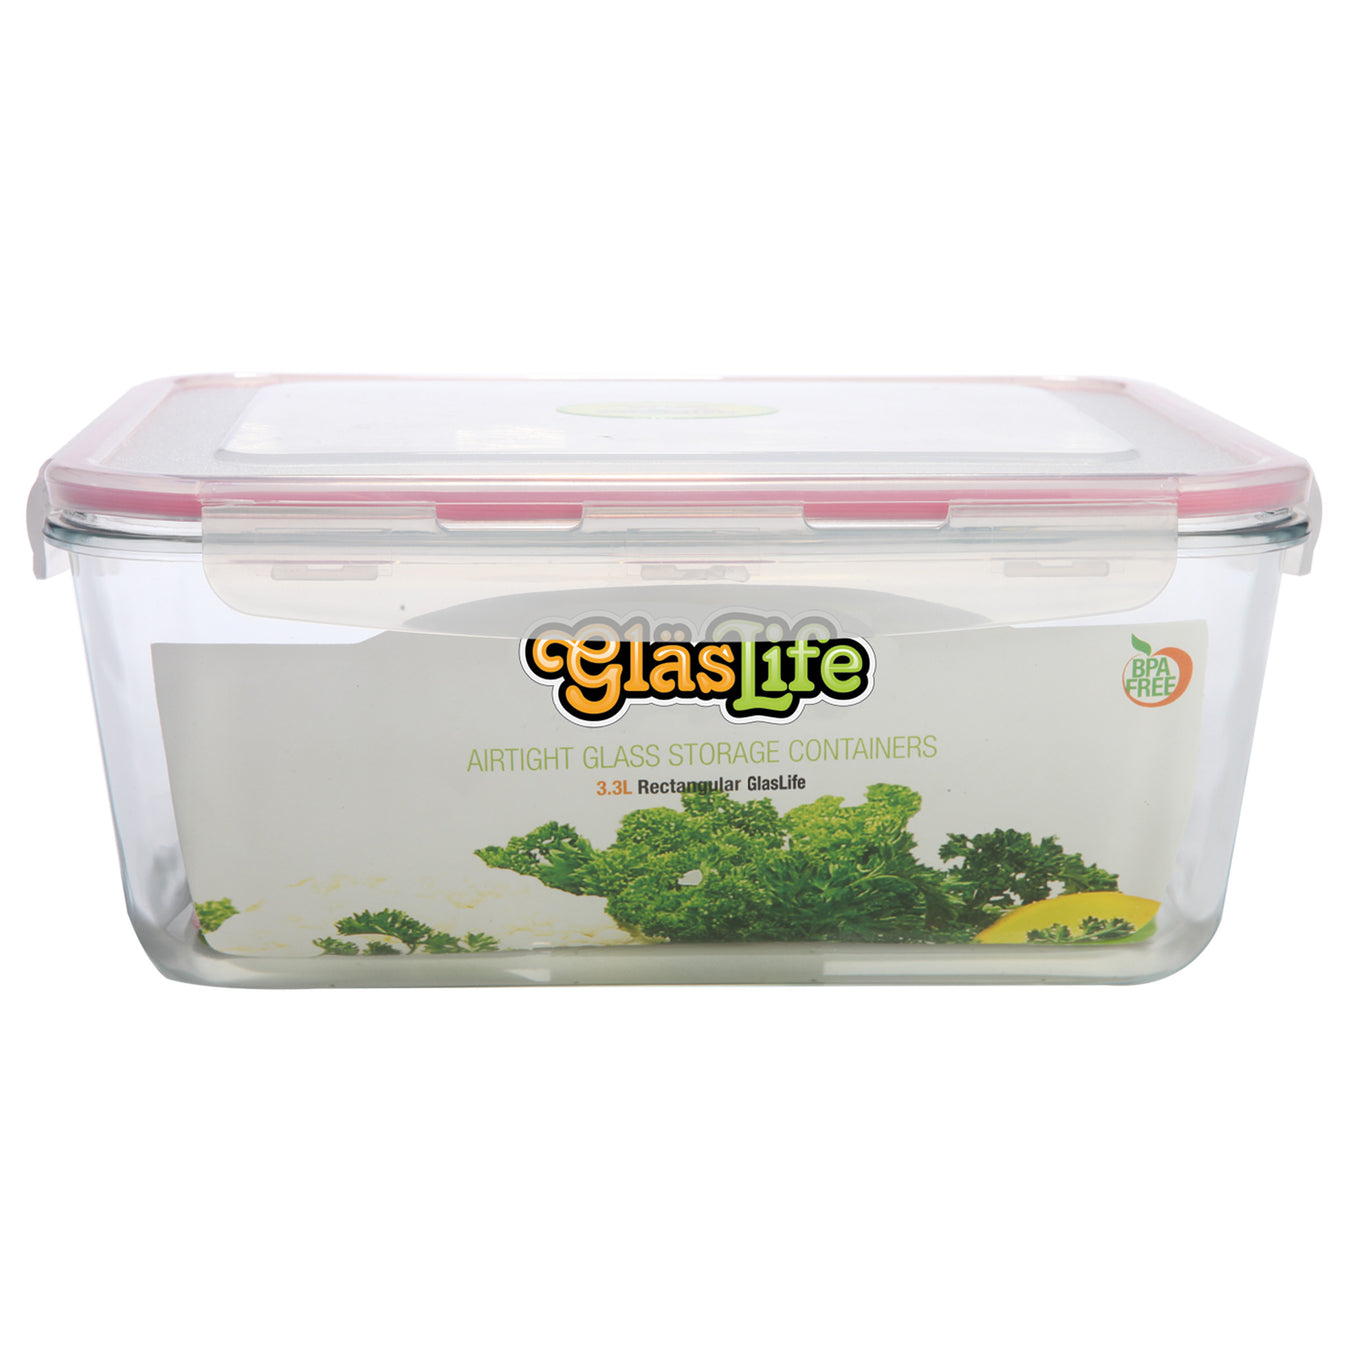 GlasLife® Air-Tight Glass Storage Container - Rectangular GLR33 X-Large 112 oz / 3.3 L